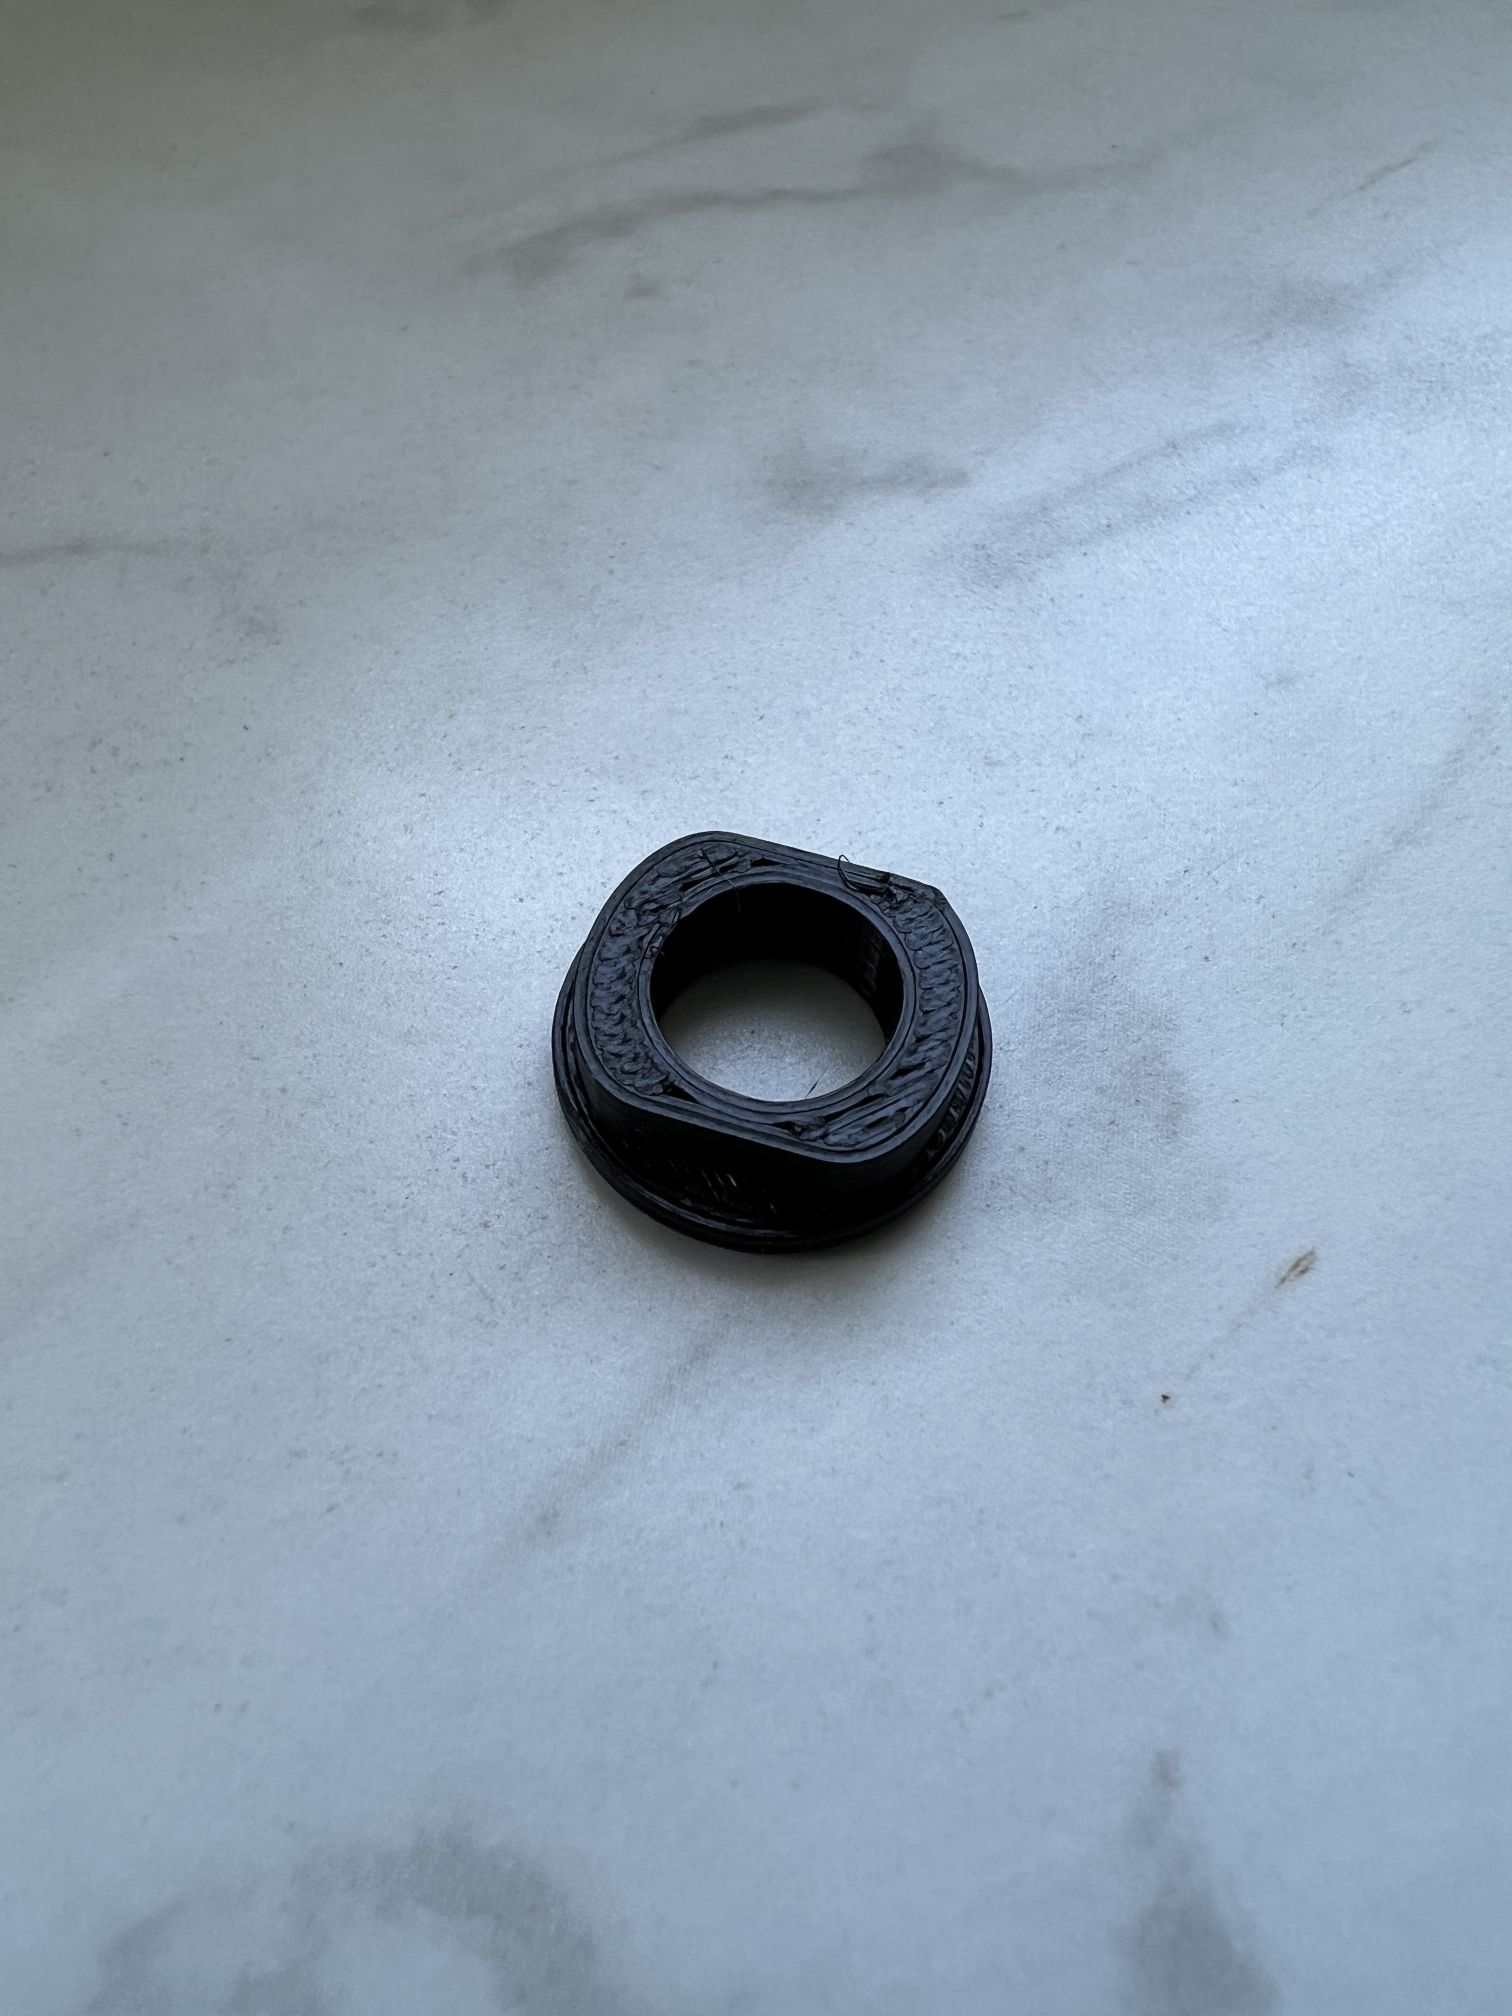 Is petg notoriously stringy and horrible for small models? I just got my  ender 3 V2 for Christmas and a jayo petg roll. I had horrible luck getting  this to print at